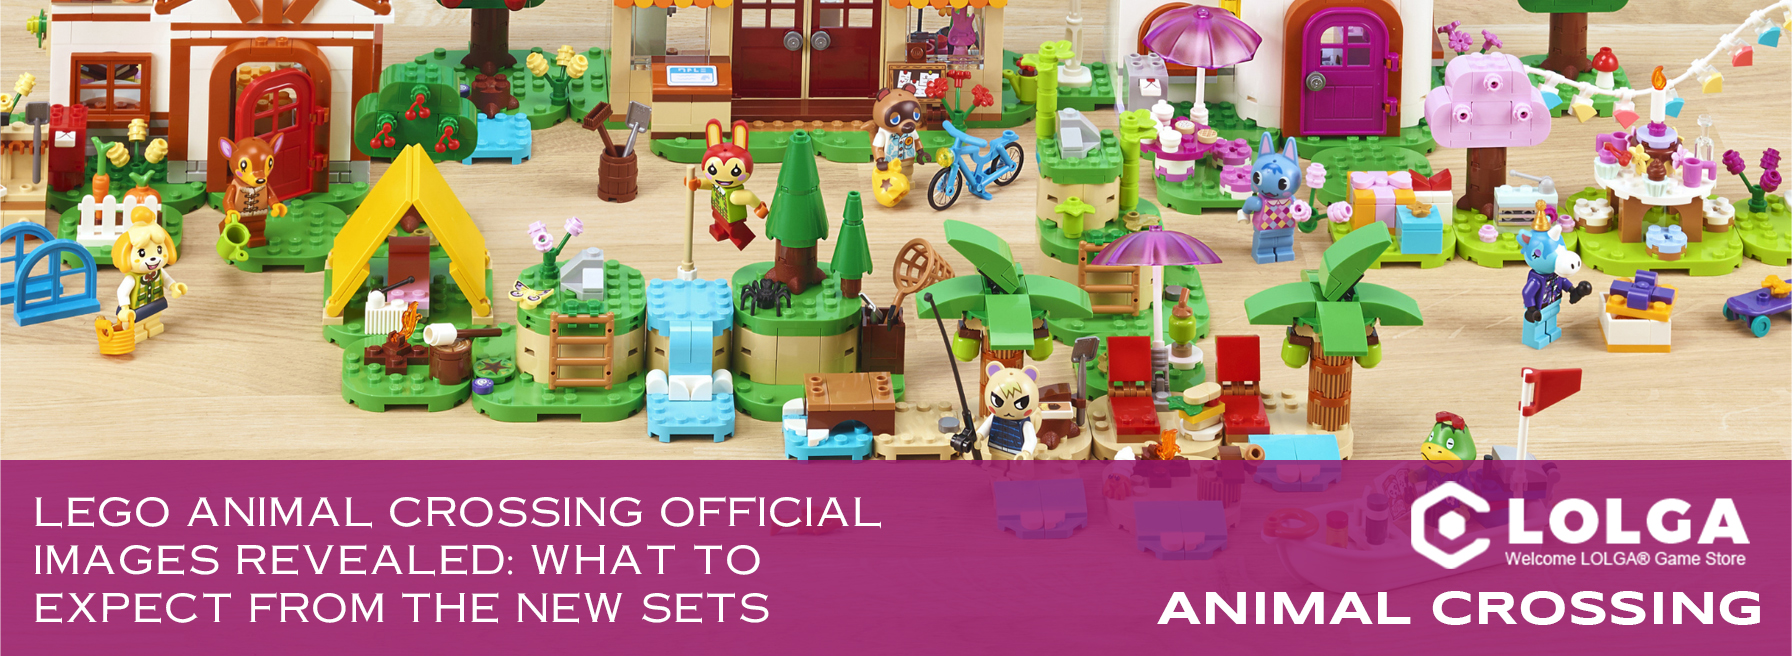  LEGO Animal Crossing Official Images Revealed: What to Expect from the New Sets